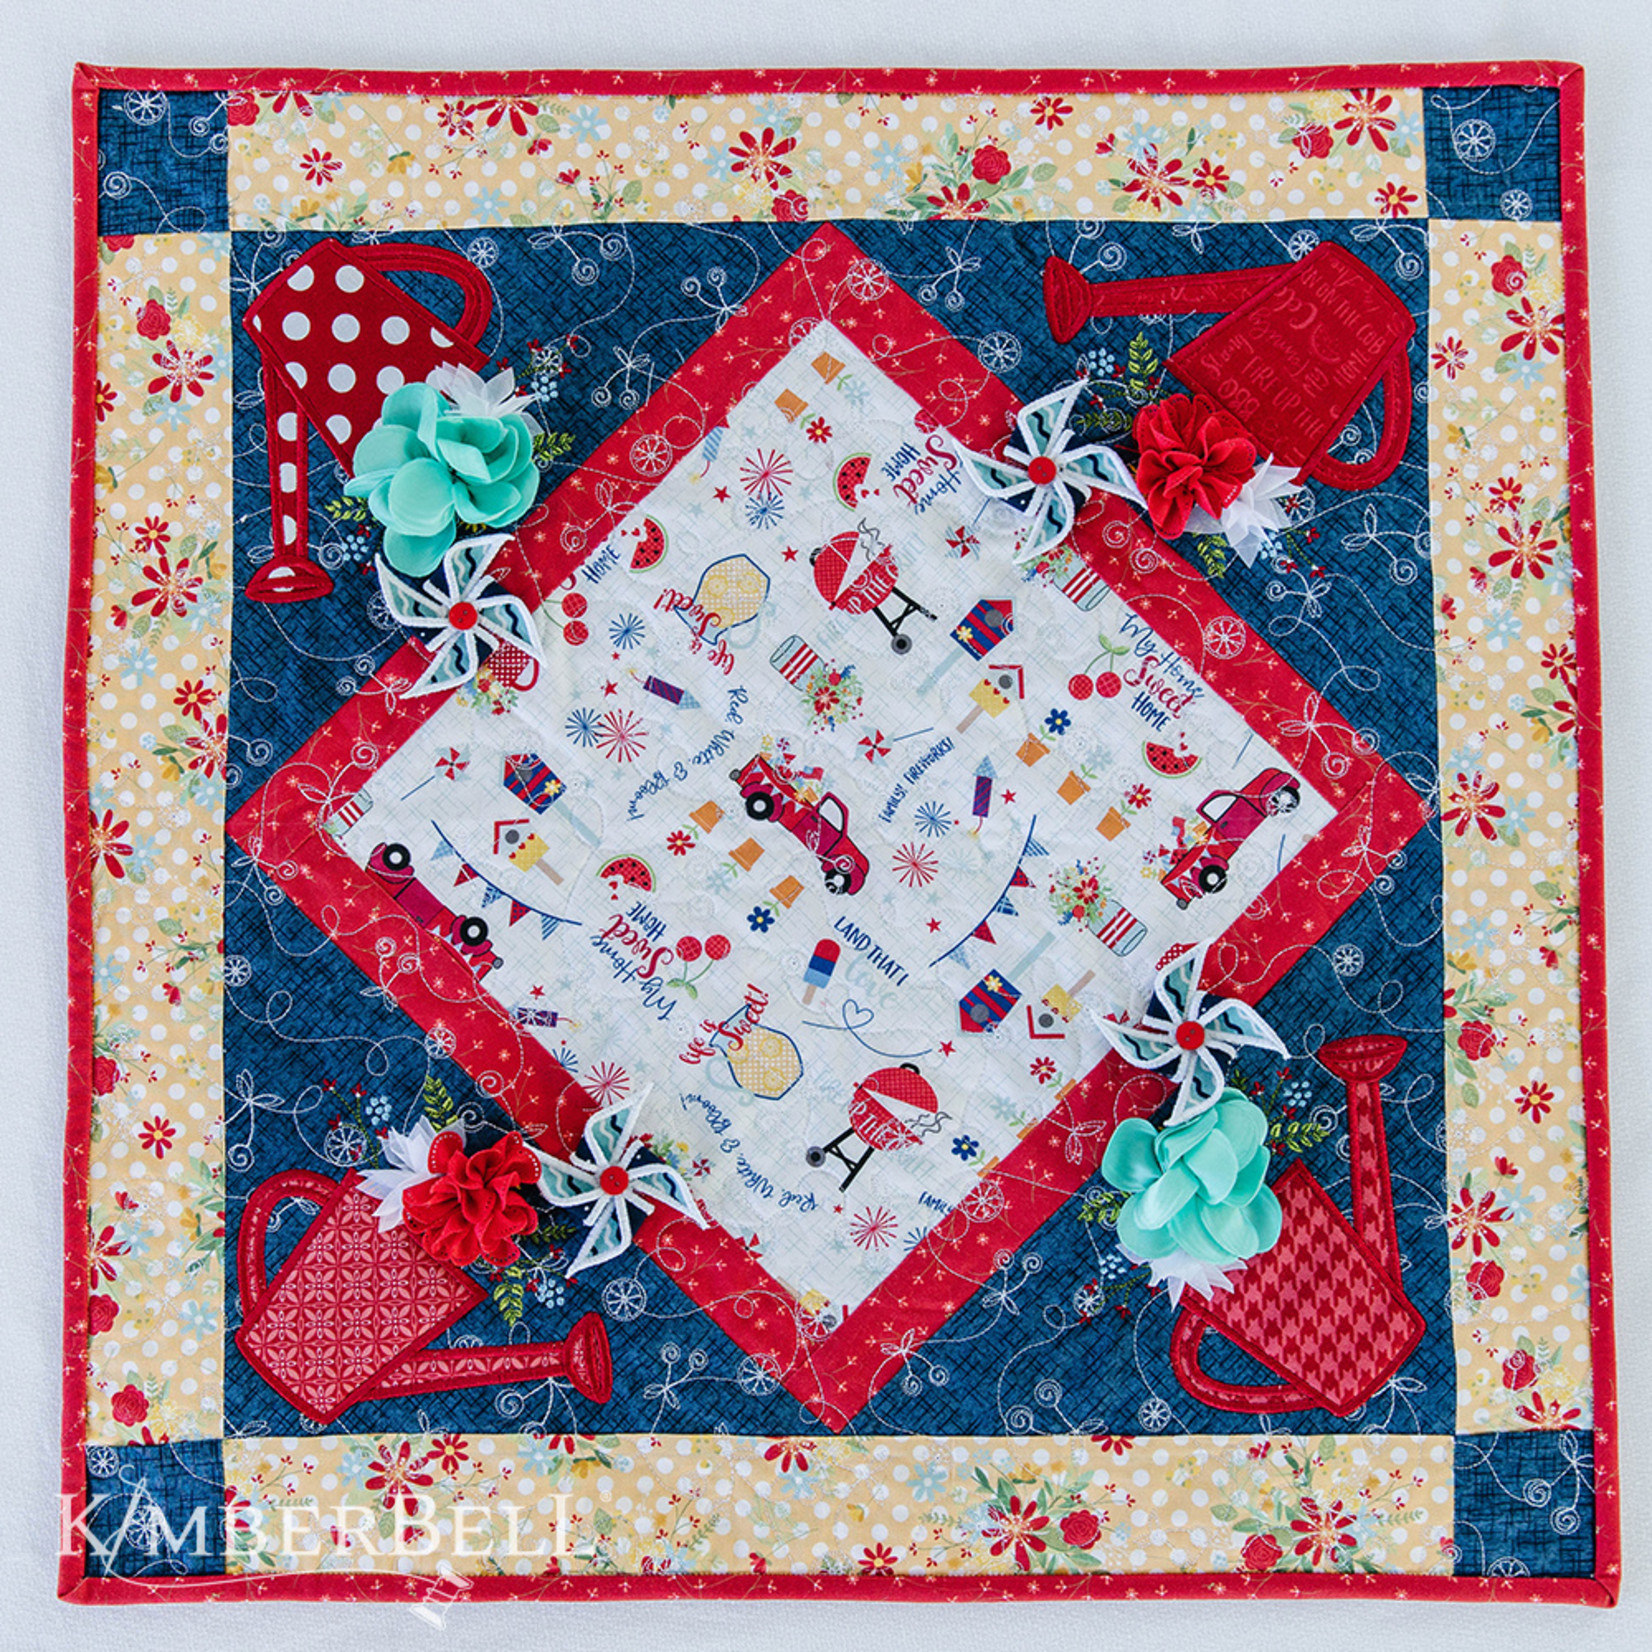 Kimberbell Designs Red White & Bloom (Embroidery Version)